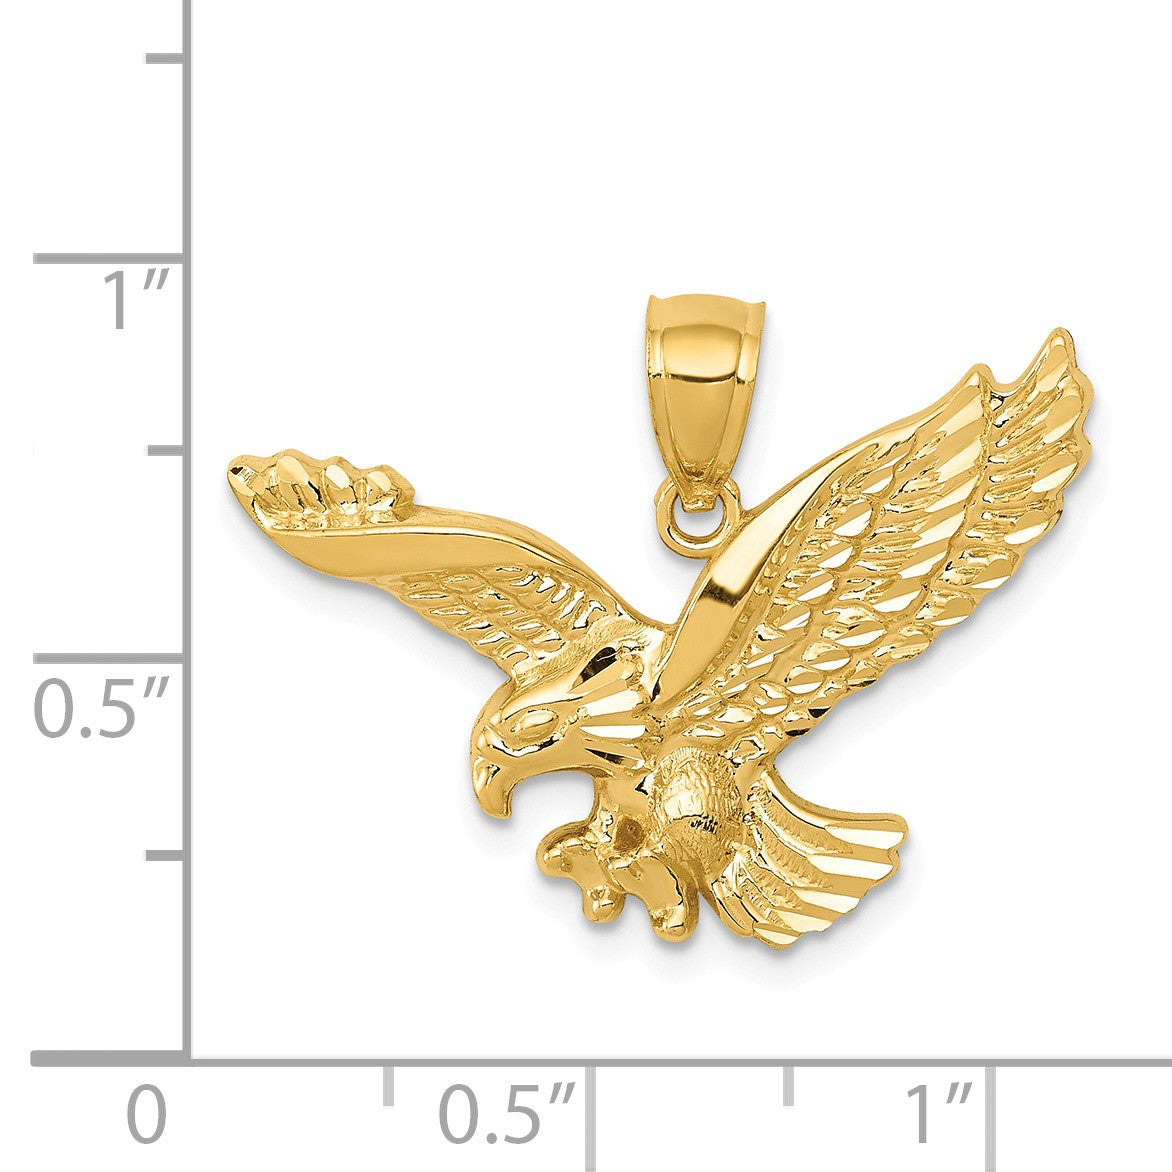 Alternate view of the 14k Yellow Gold Eagle Pendant, 28mm (1 1/8 Inch) by The Black Bow Jewelry Co.